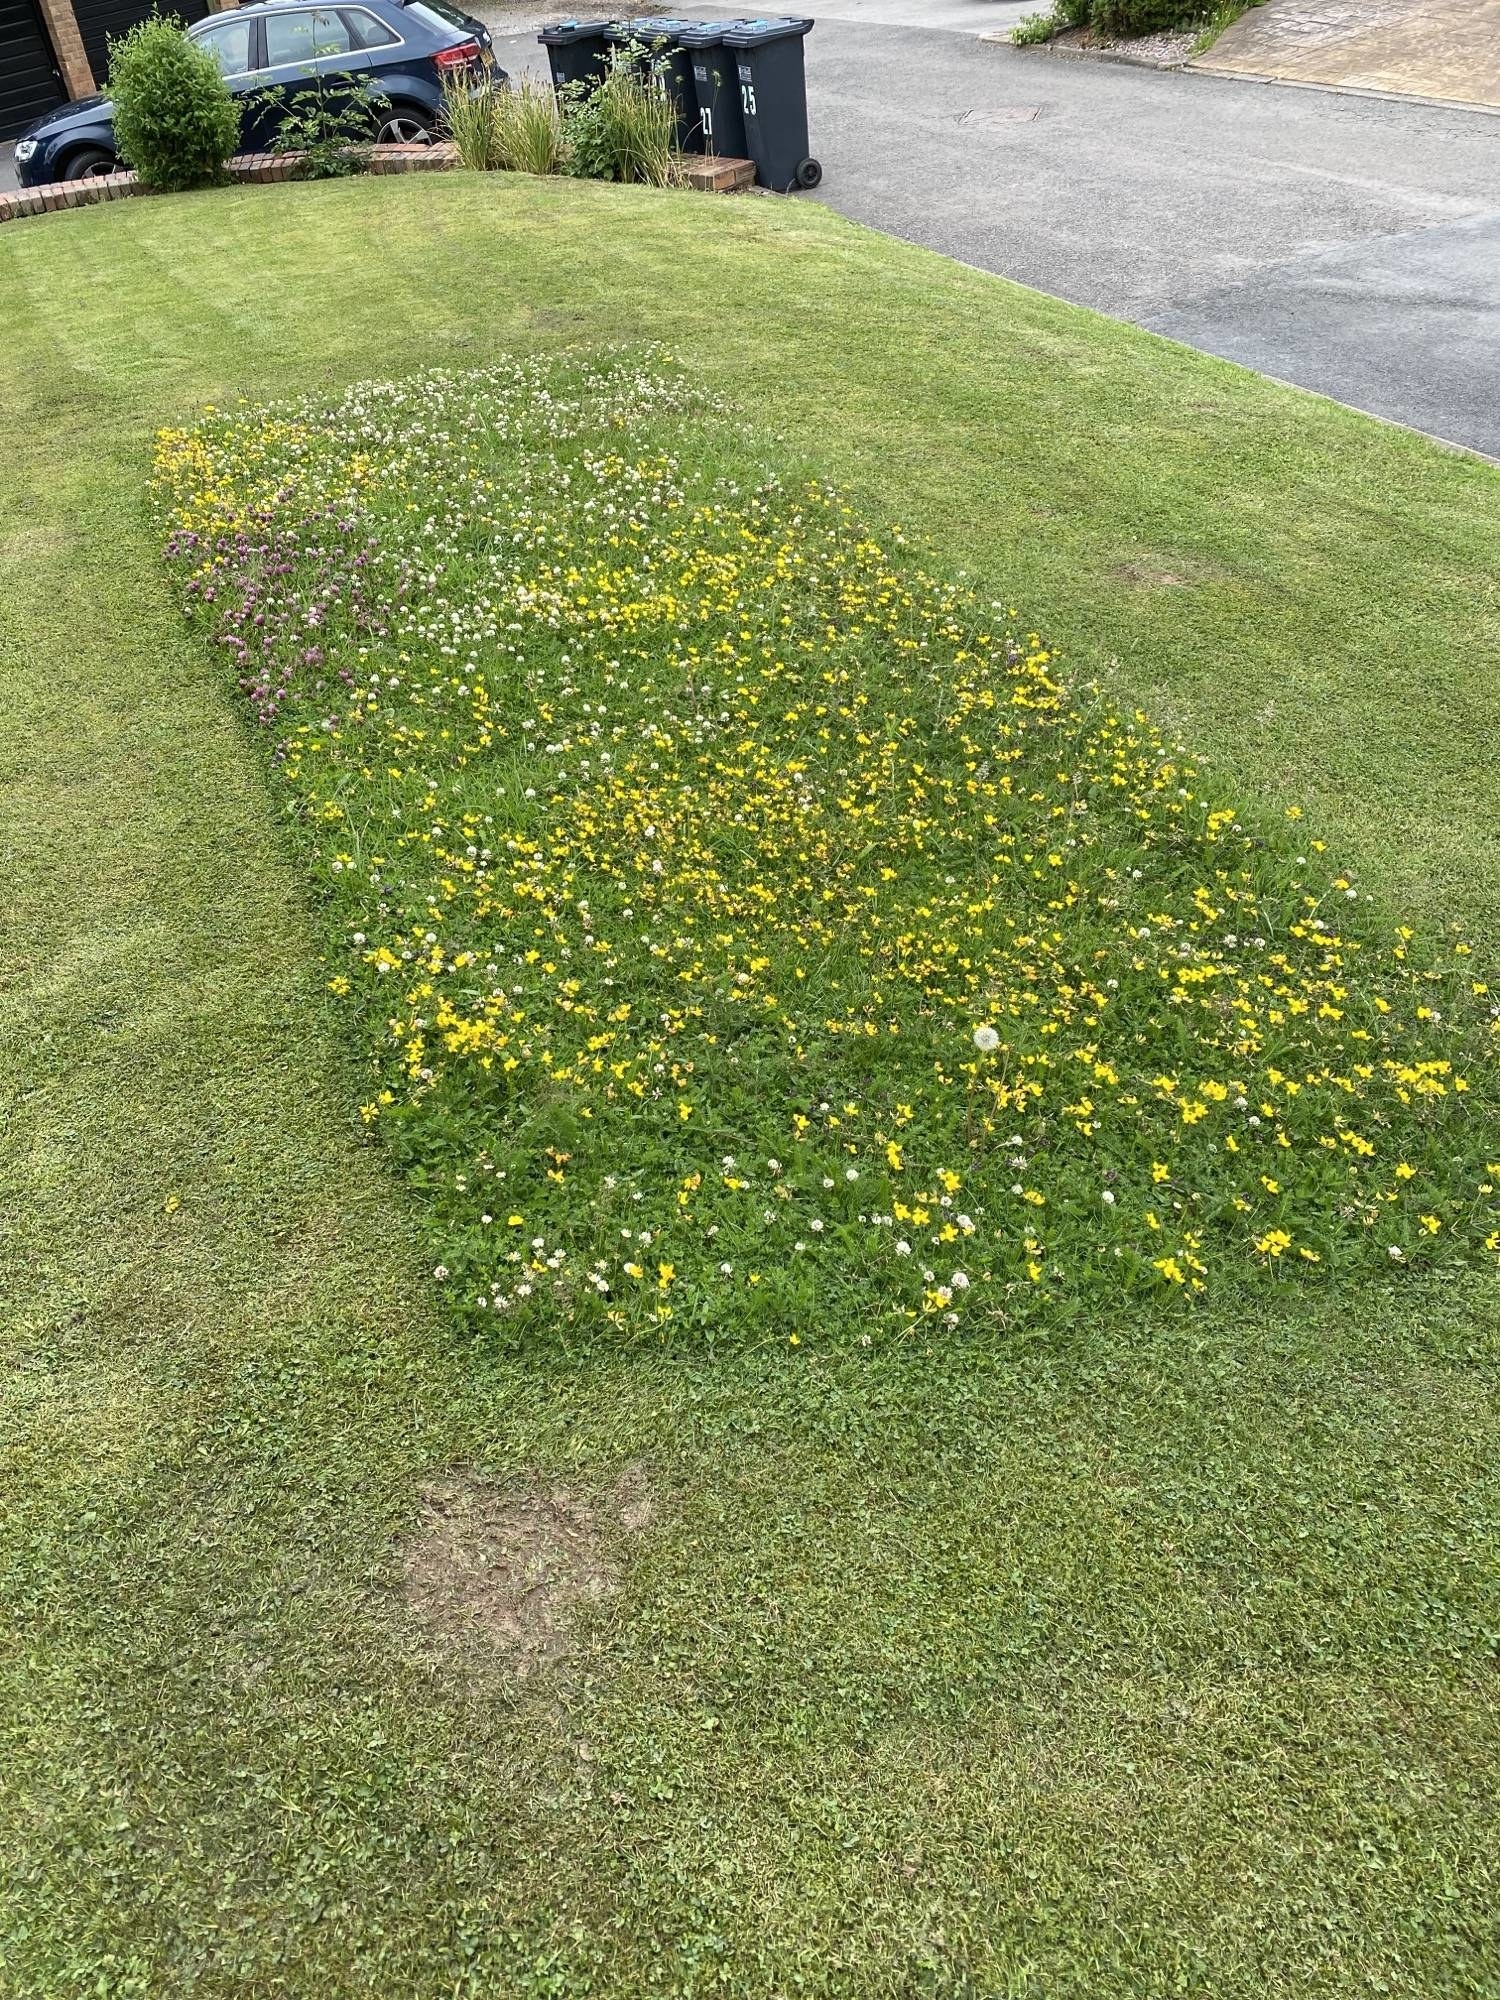 A rectangle of flowers in a patch of grass